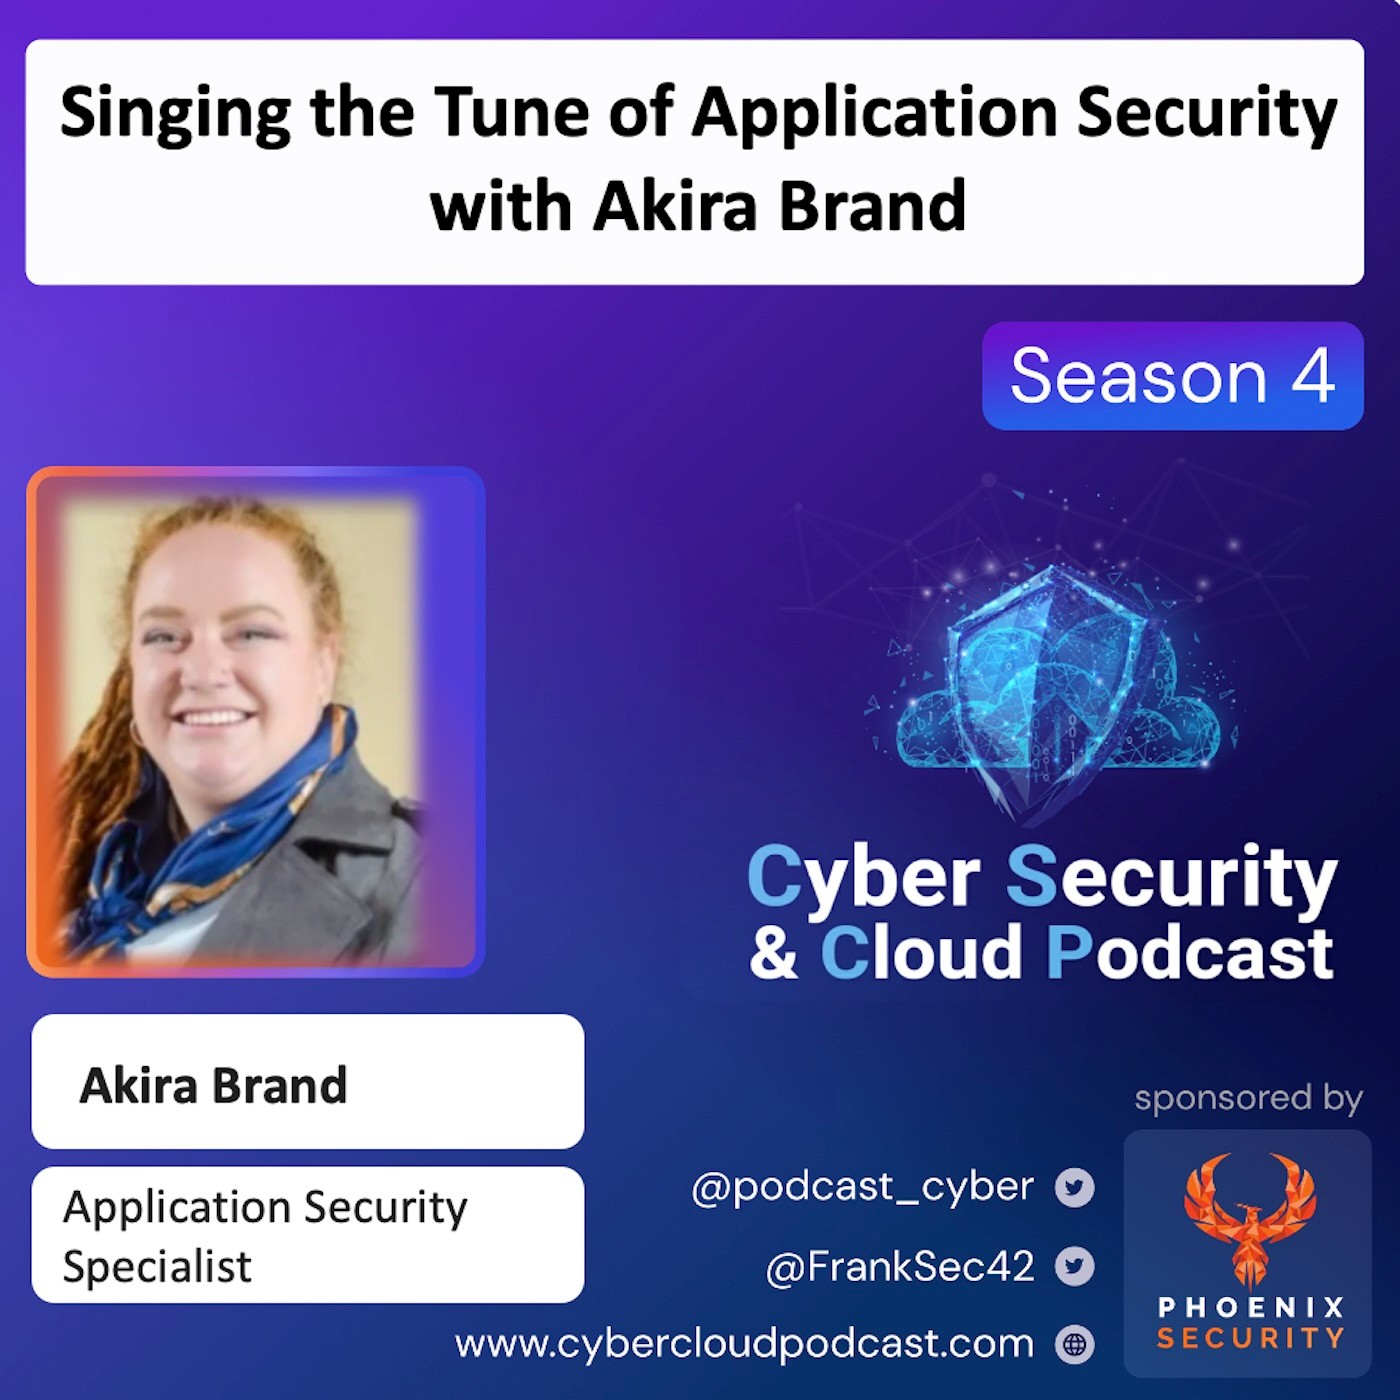 CSCP S4EP14 - Akira Brand - Singing the Tune of Application Security with Akira Brand